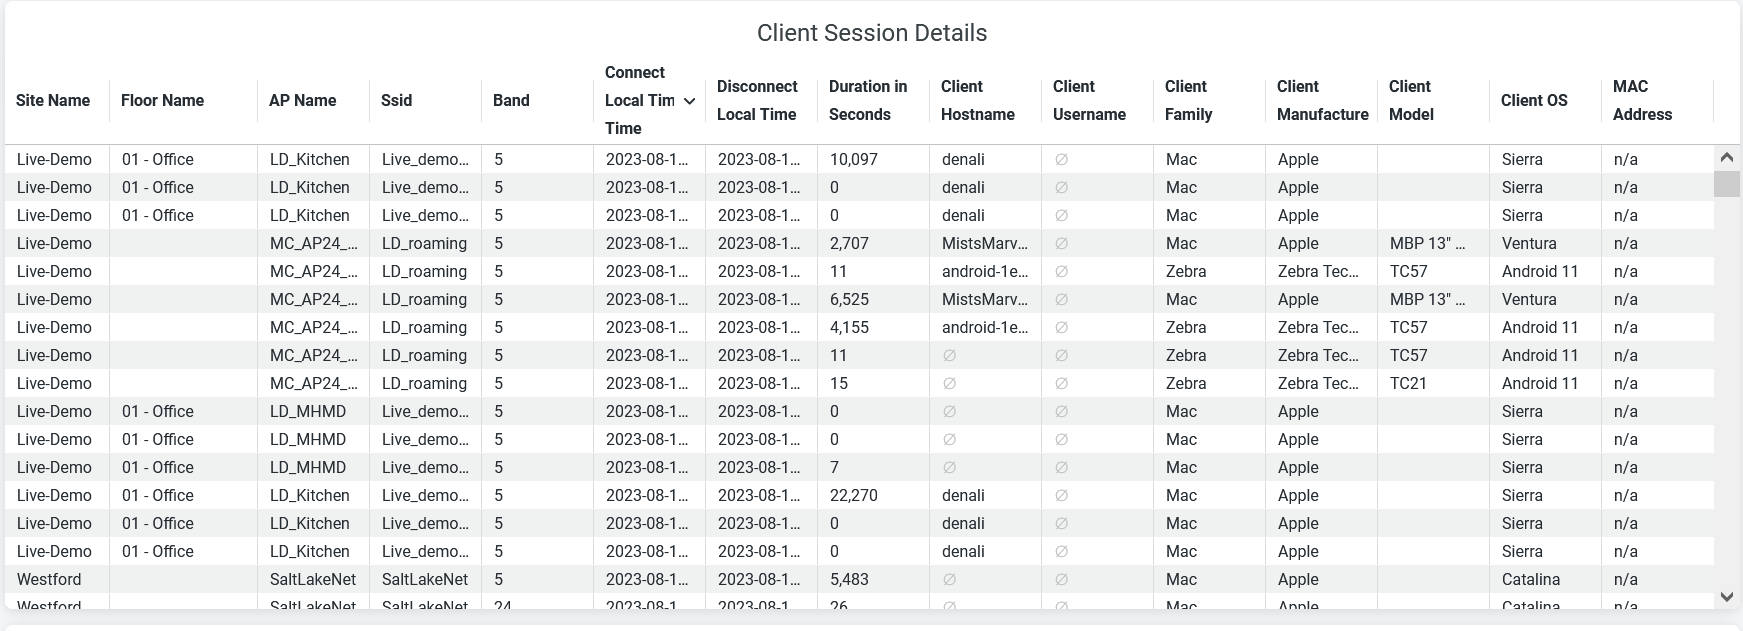 Wireless Client Sessions Details